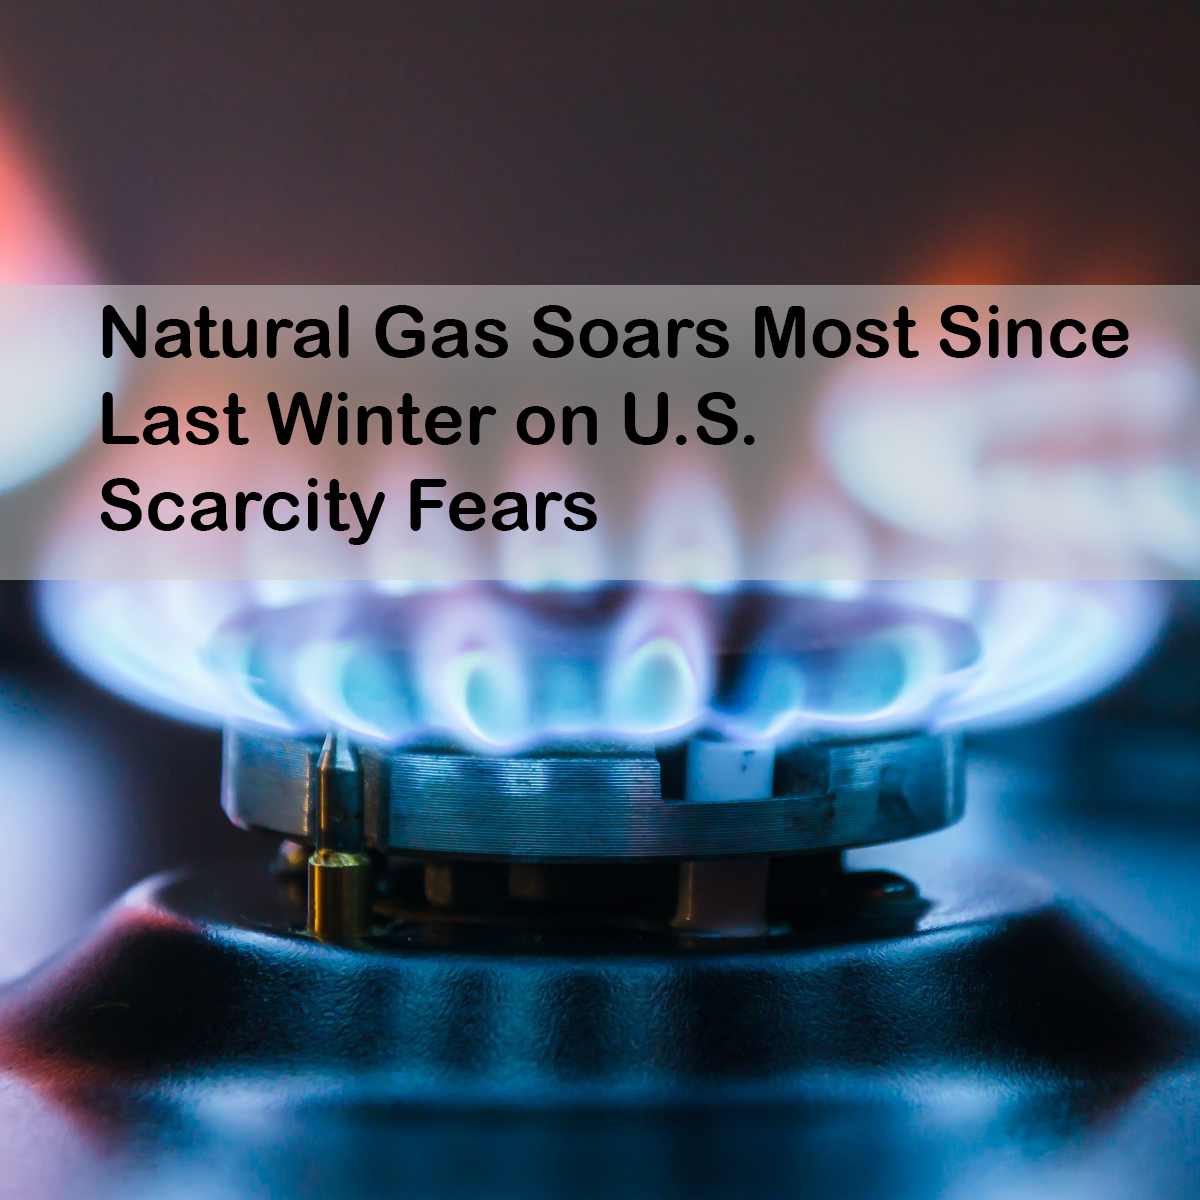 Natural Gas Soars Most Since Last Winter on U.S. Scarcity Fears